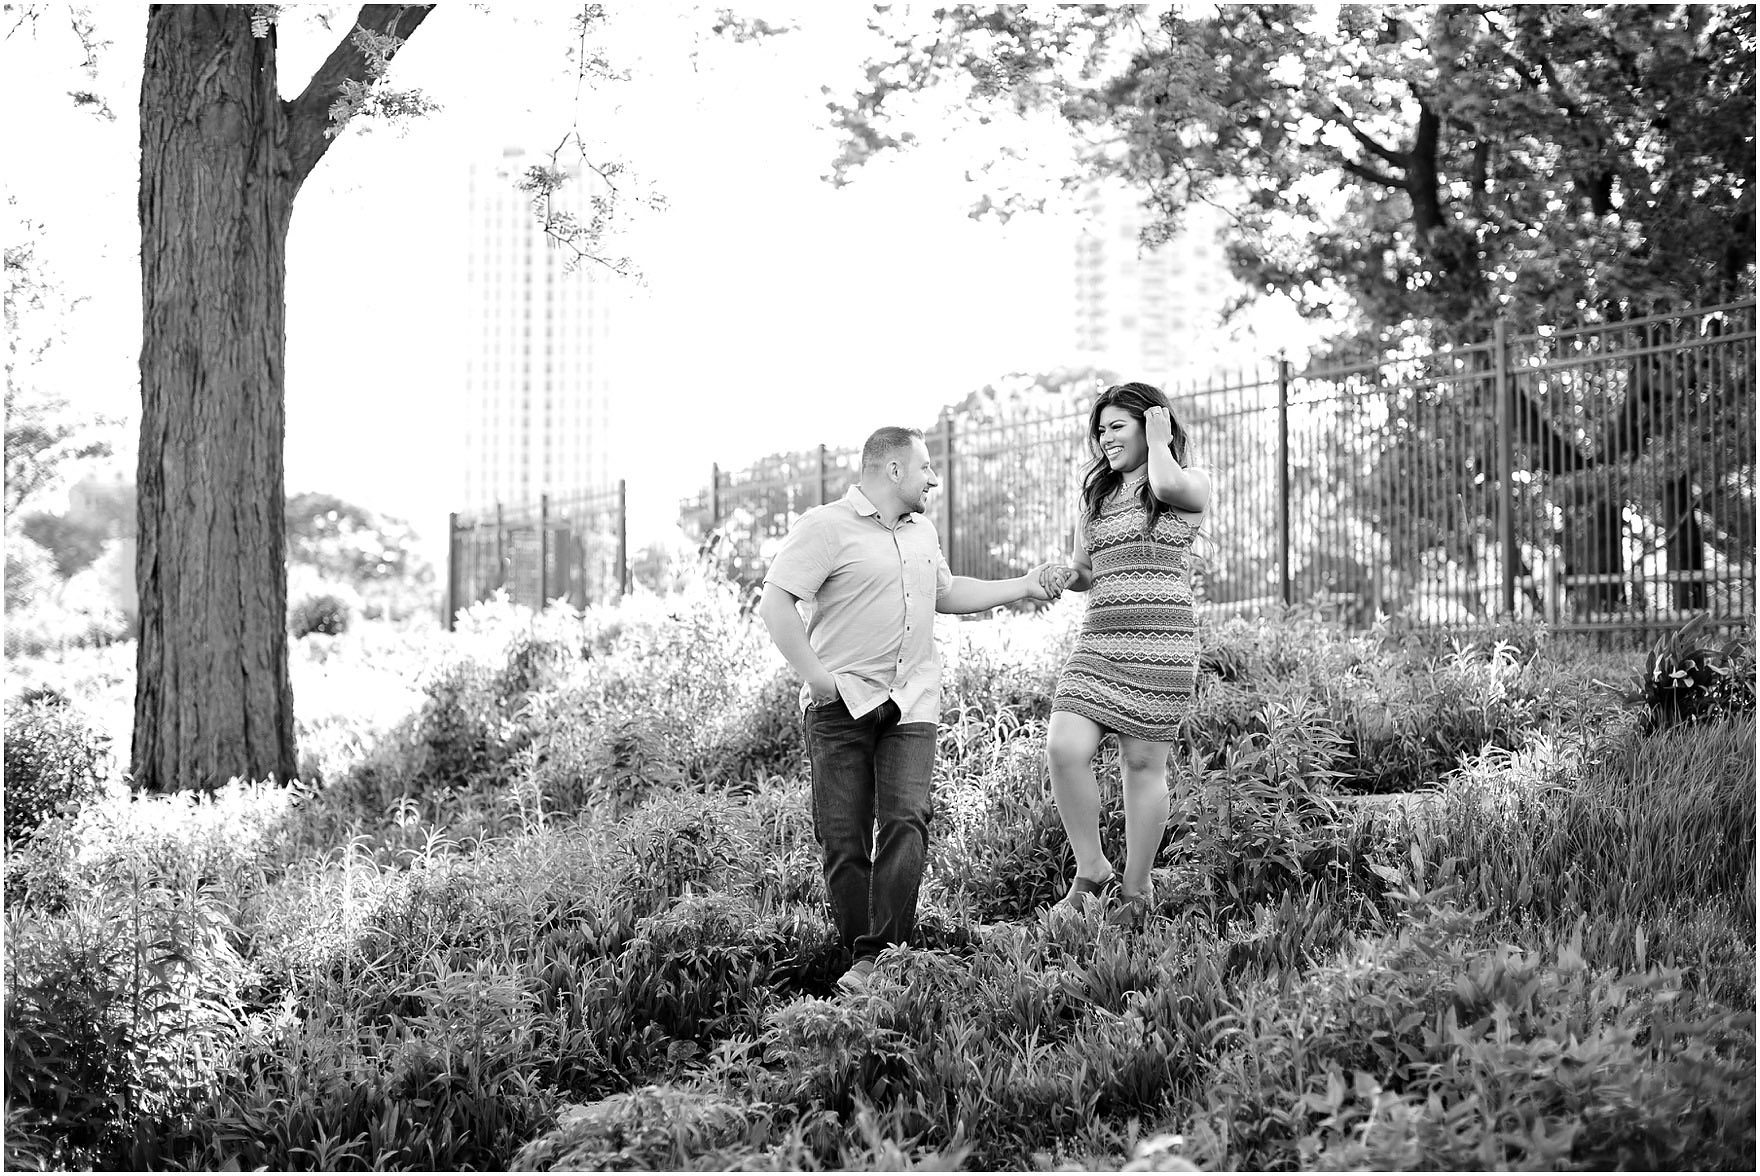 LincolnParkZooEngagementPhotosLincolnParkEngagementPhotosHoneycombEngagementChicagoEngagementPhotographer__0016